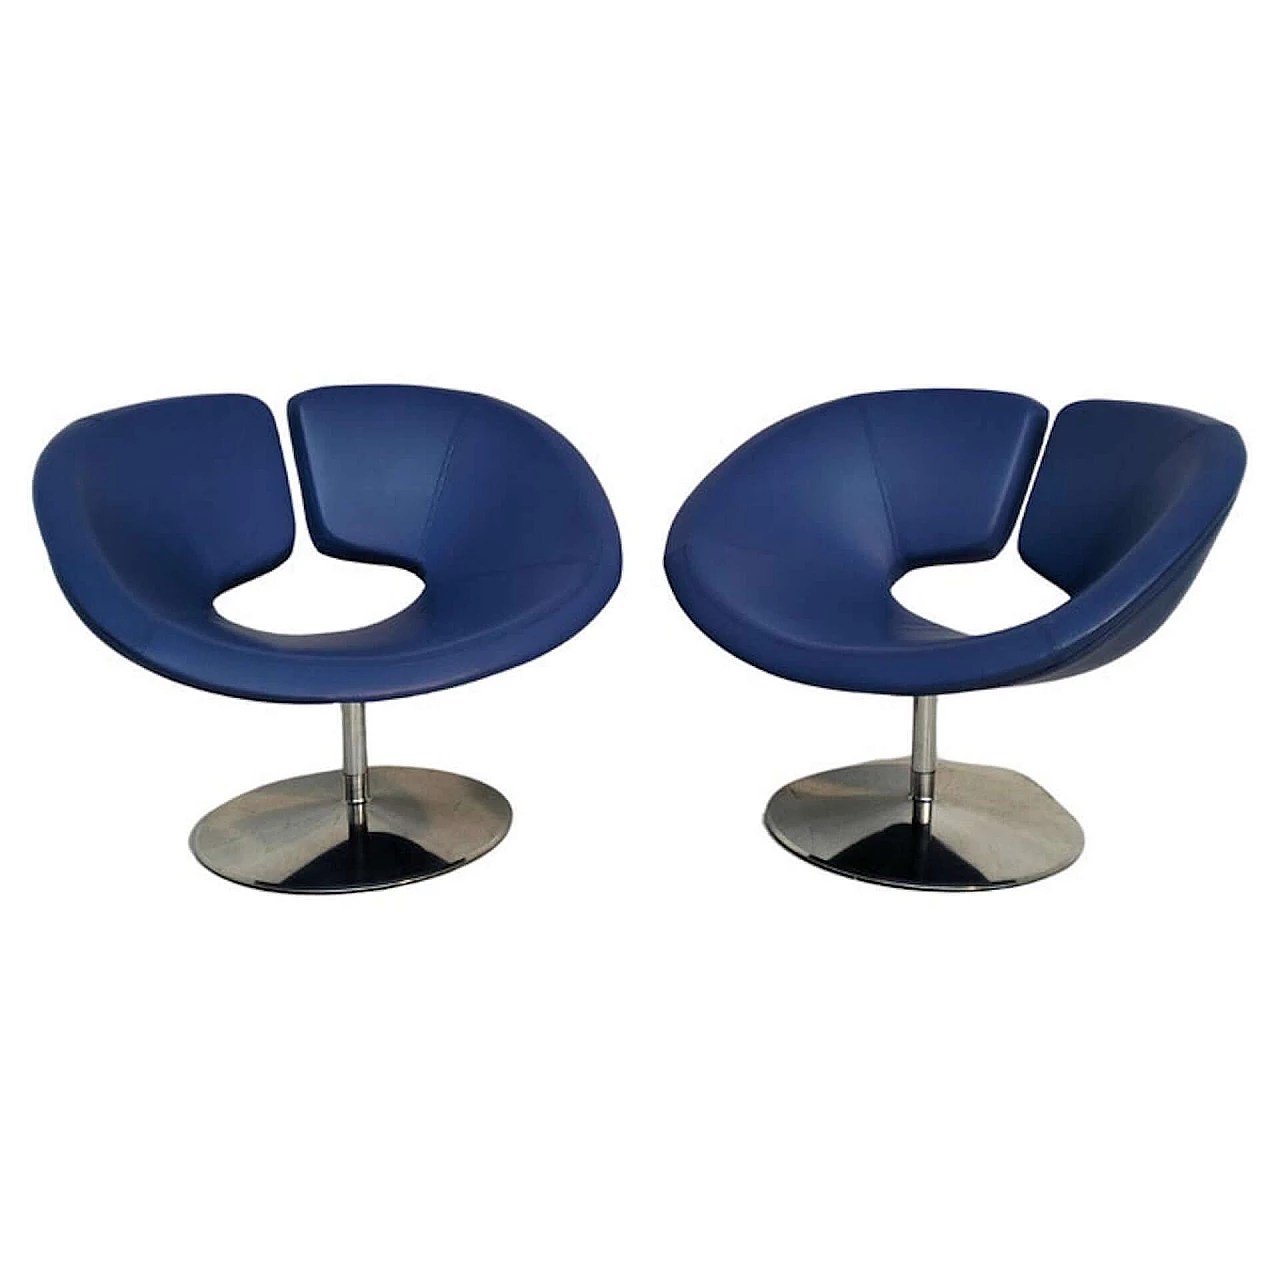 Pair of Apollo armchairs by Patrick Norguet for Artifort 1